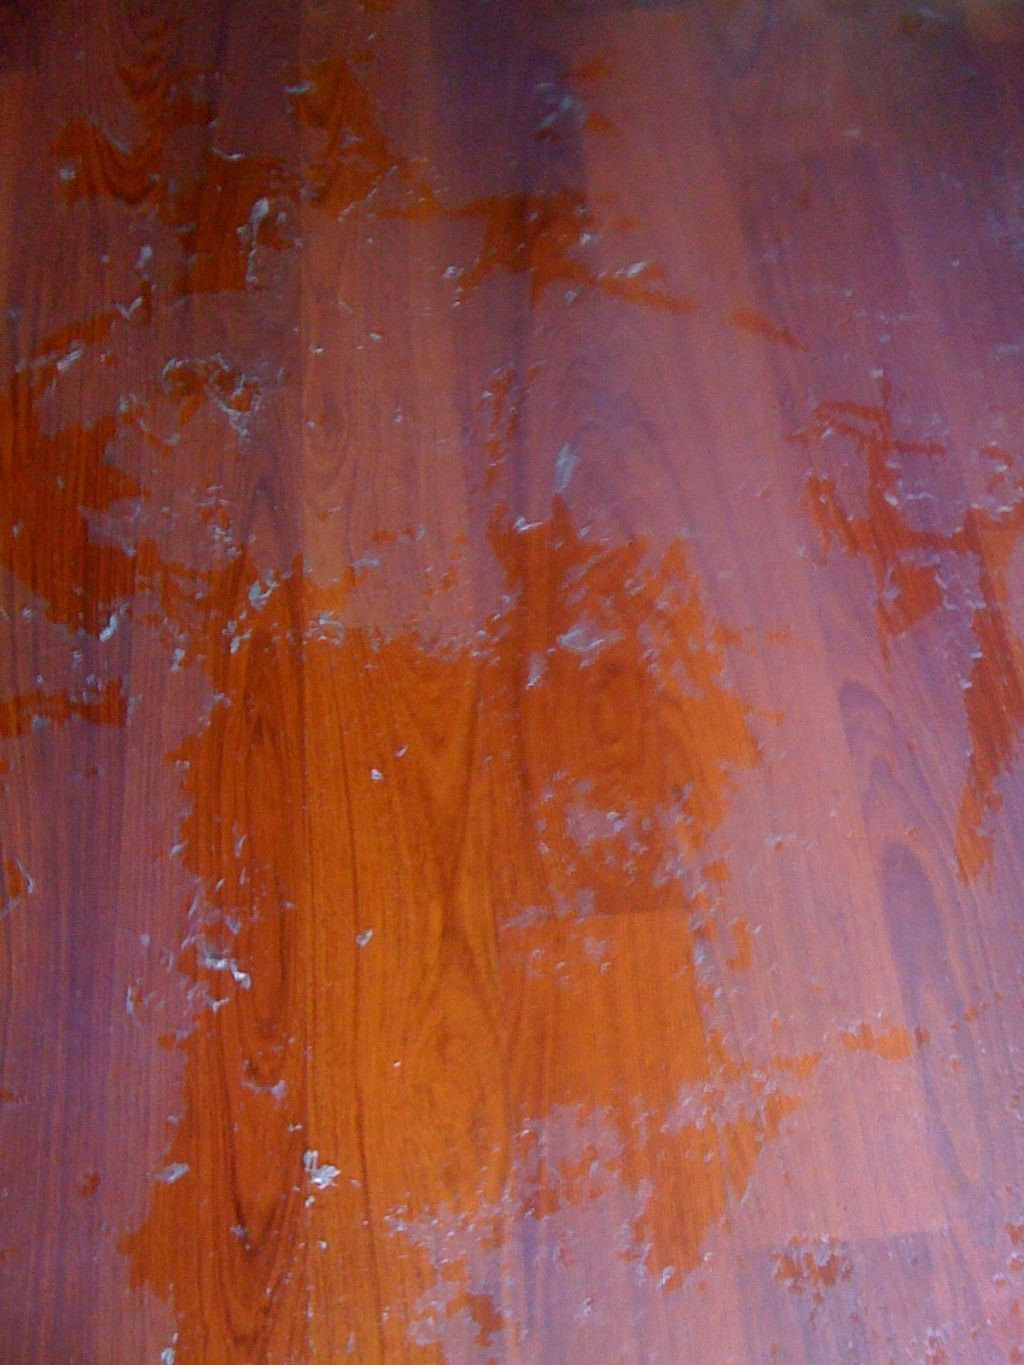 17 Ideal Diy Staining Hardwood Floors 2024 free download diy staining hardwood floors of how to remove wax and oil soap cleaners from wood floors recipes for how to remove oily or wax build up from cleaning or polishing solutions from wood floors